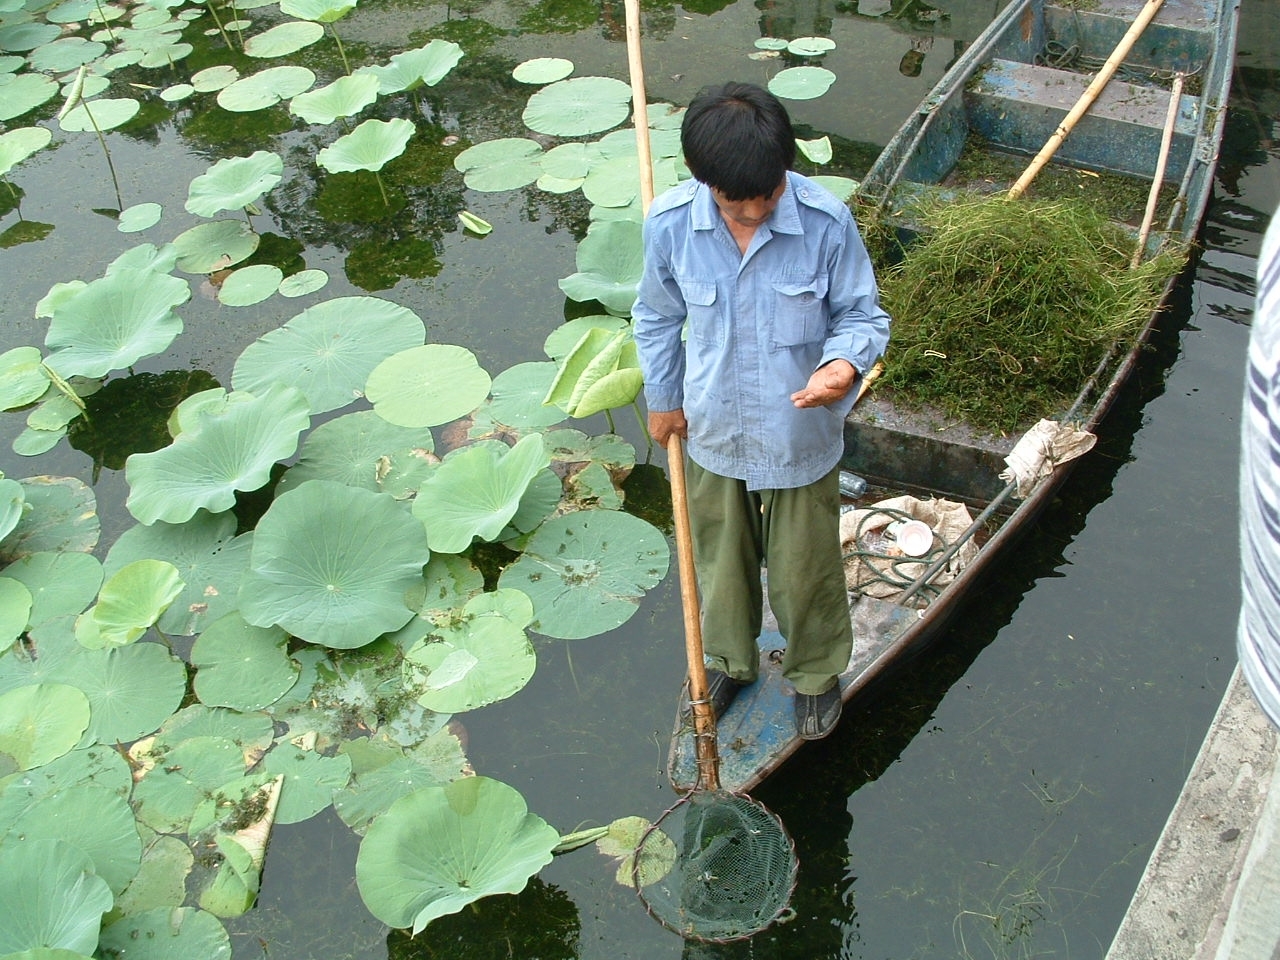 A local man on a traditional boat on the river surrounded by water lily pads in Chengdu, China.